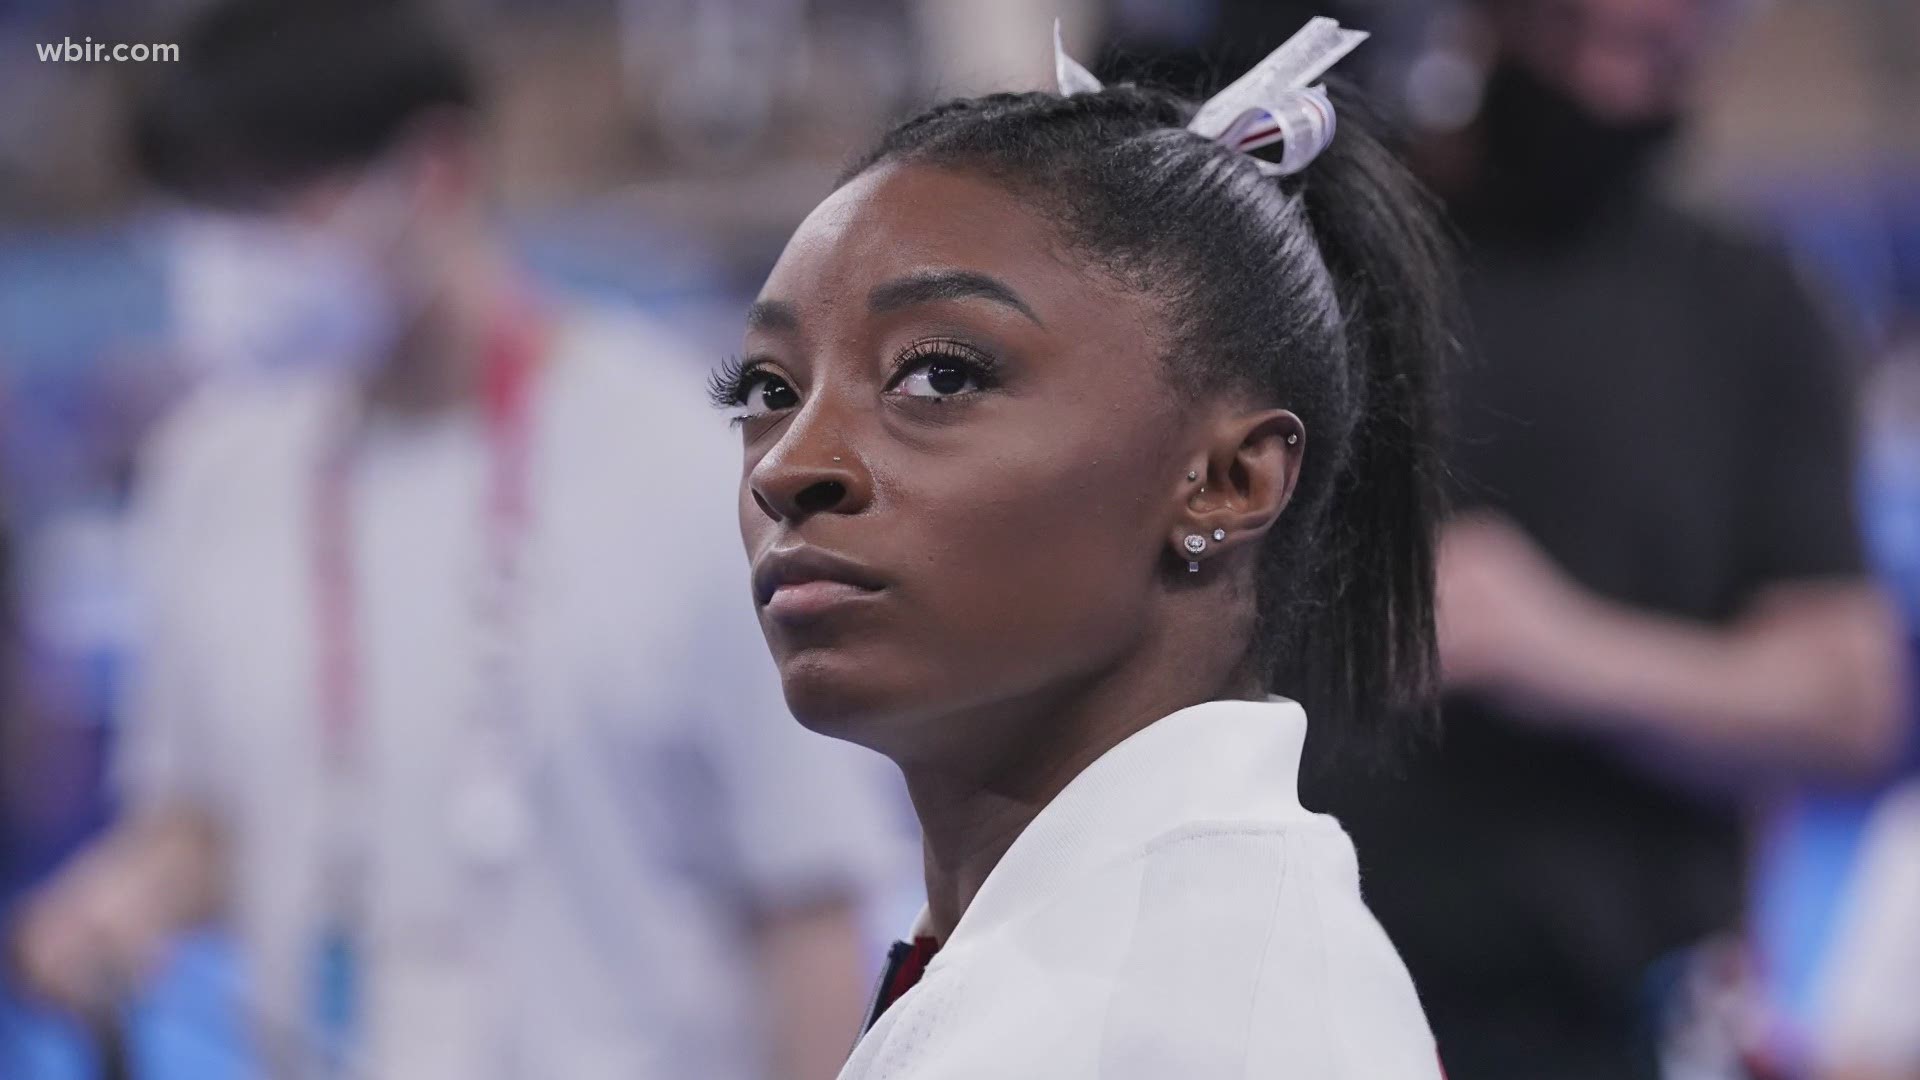 Gymnastics great Simone Biles withdrew from the team event finals, saying the pressure of the games has taken a toll on her mental health.